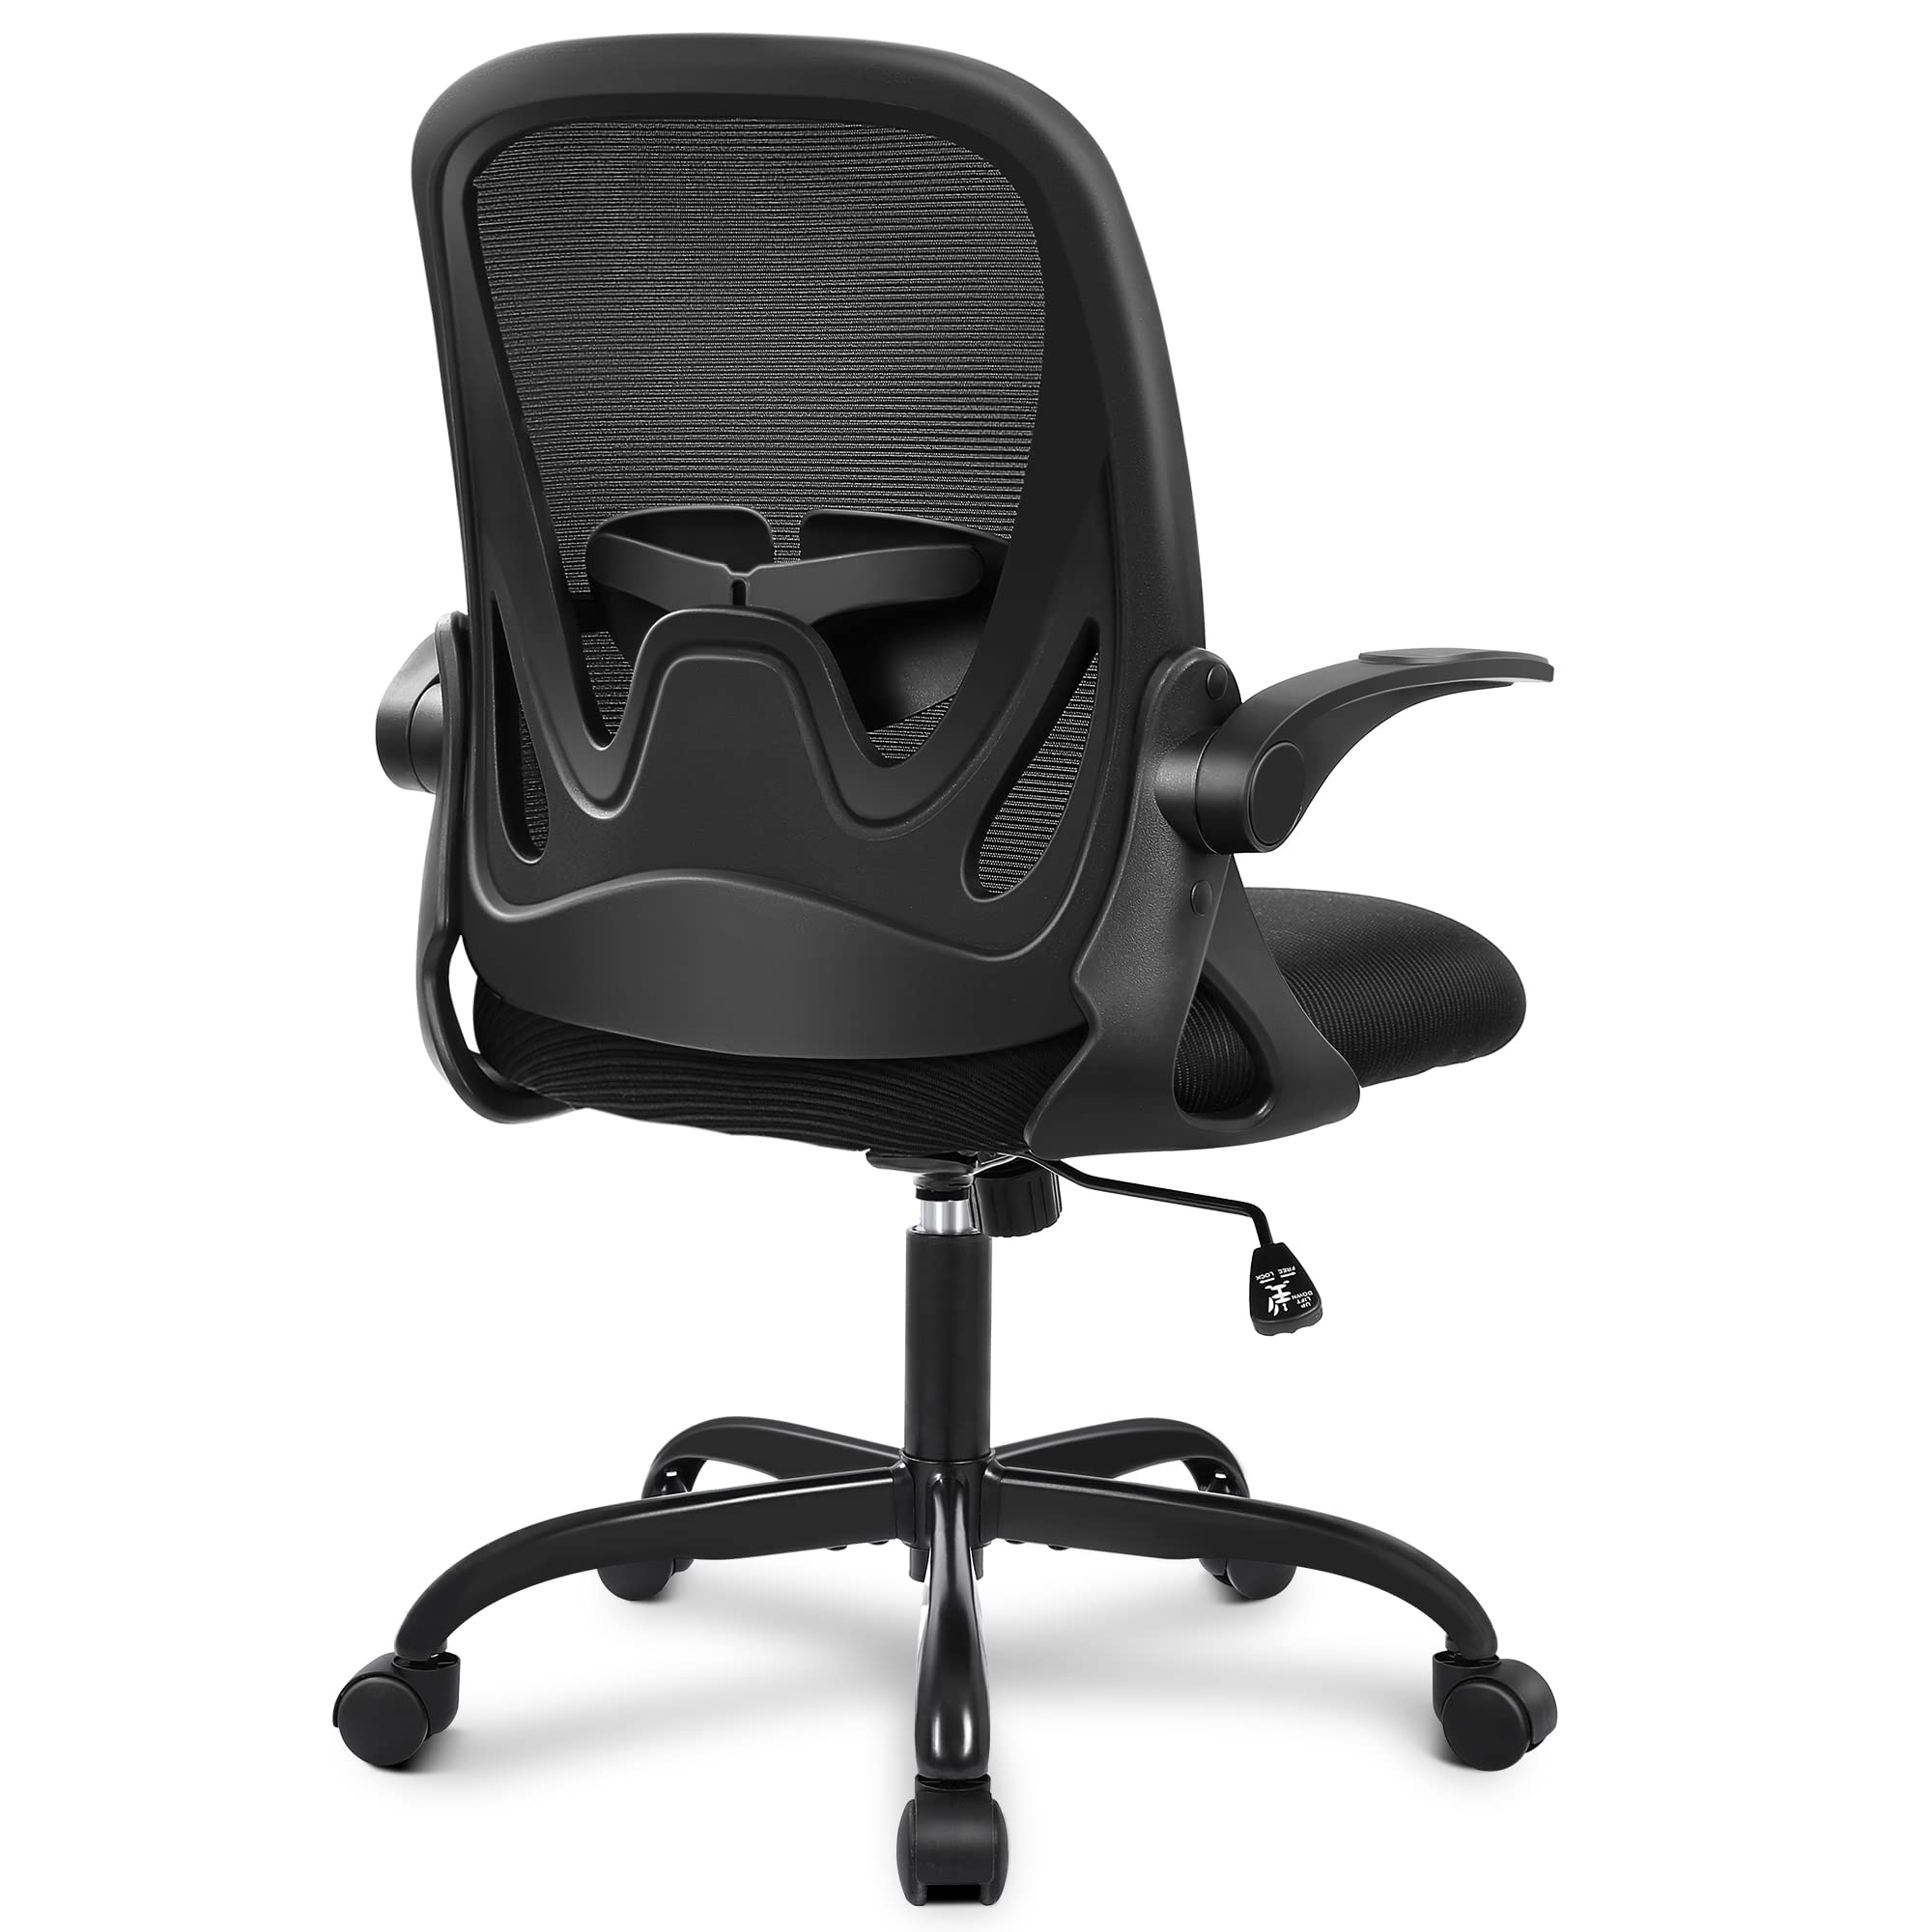 Primy Office Ergonomic Desk chair with Adjustable Lumbar Support and Height, Swivel Breathable Mesh computer chair with Flip up 